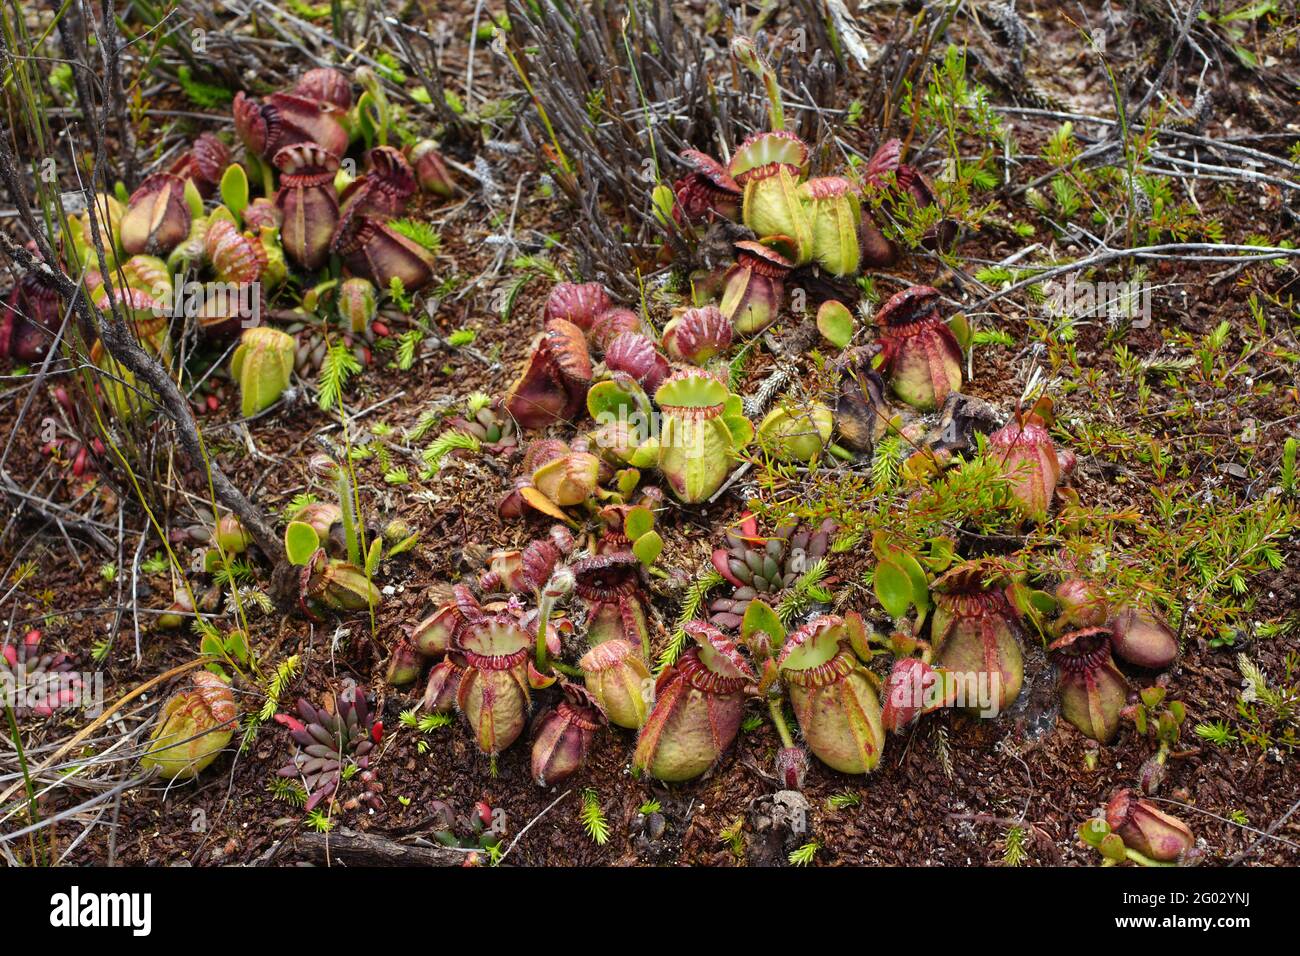 Large group of Cephalotus follicularis, the Western Australian pitcher plant, in natural habitat with flower stalks Stock Photo